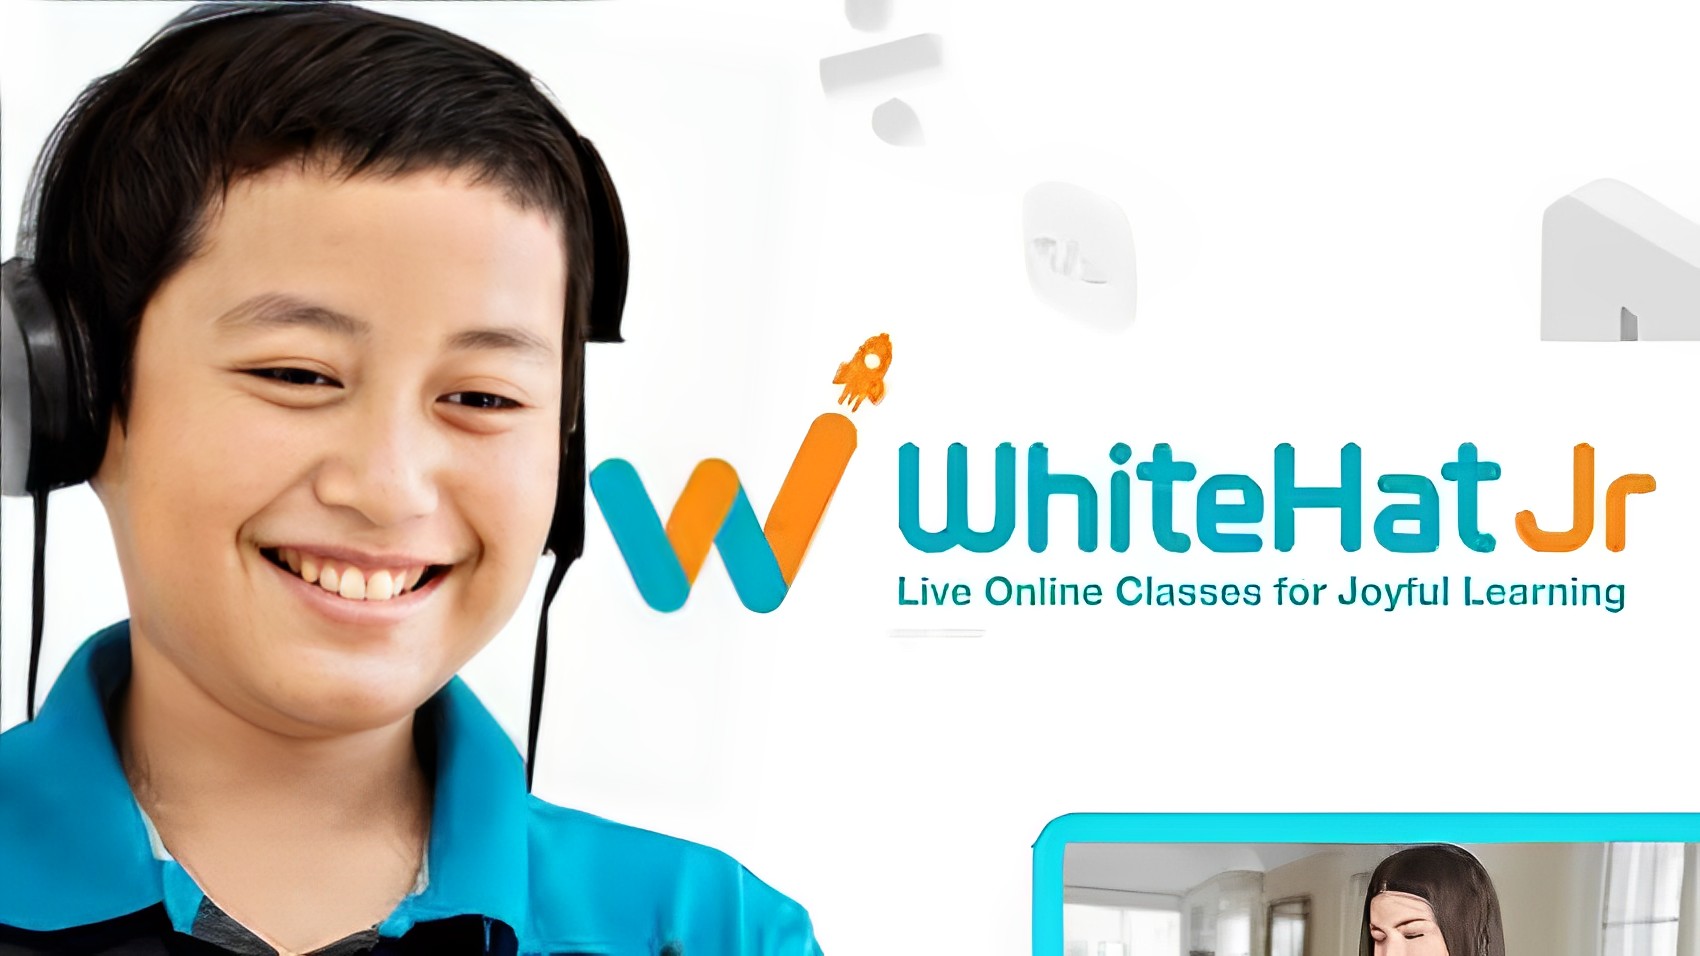 whitehatjr-Top 7 Learning Apps In India